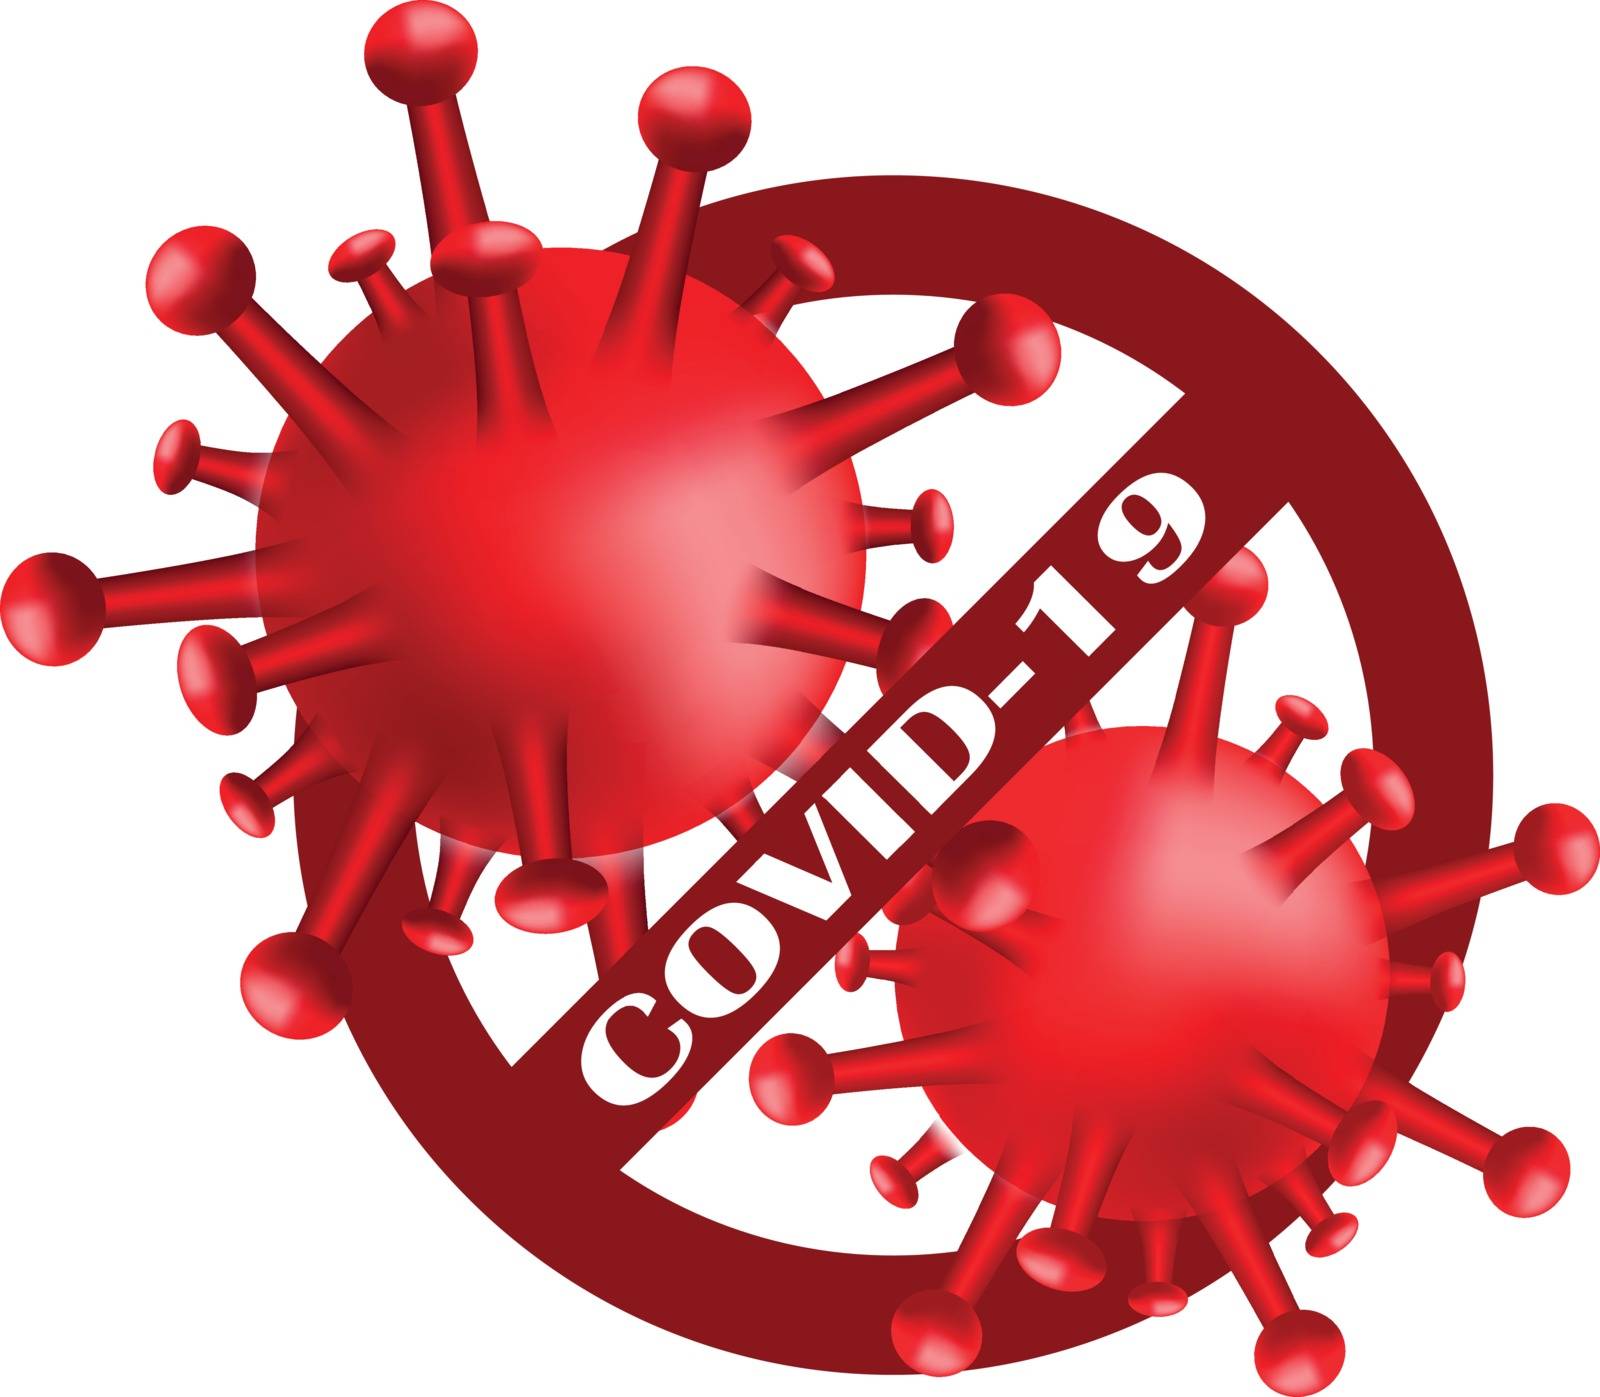 Stop Covid-19.Sign and Symbol for viral disease cell Covid-19. Dangerous virus vector illustration concept
Pandemic medical health sign